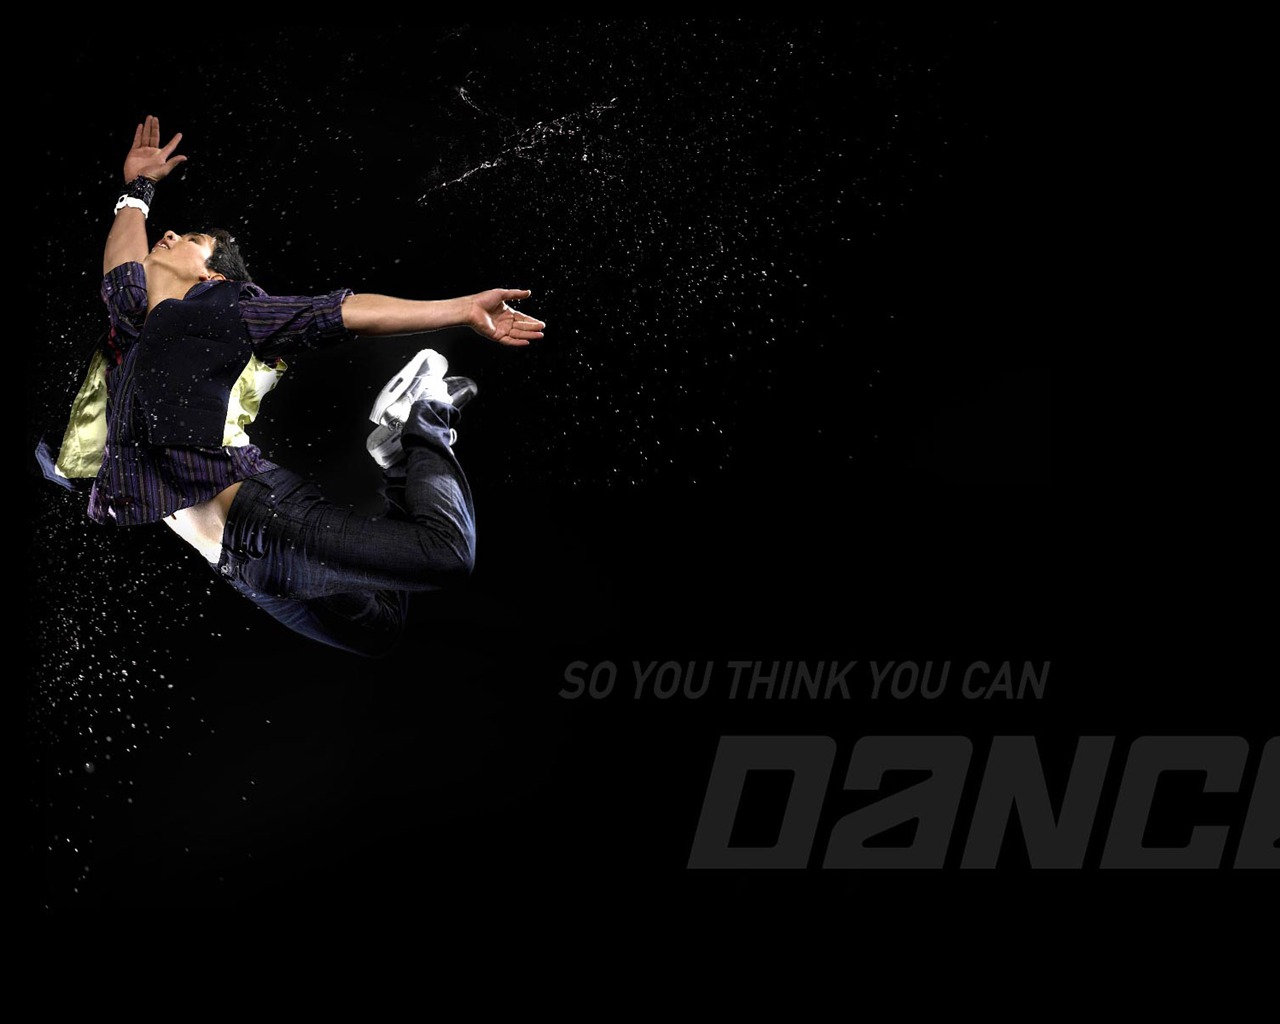 So You Think You Can Dance 舞林爭霸壁紙(一) #8 - 1280x1024